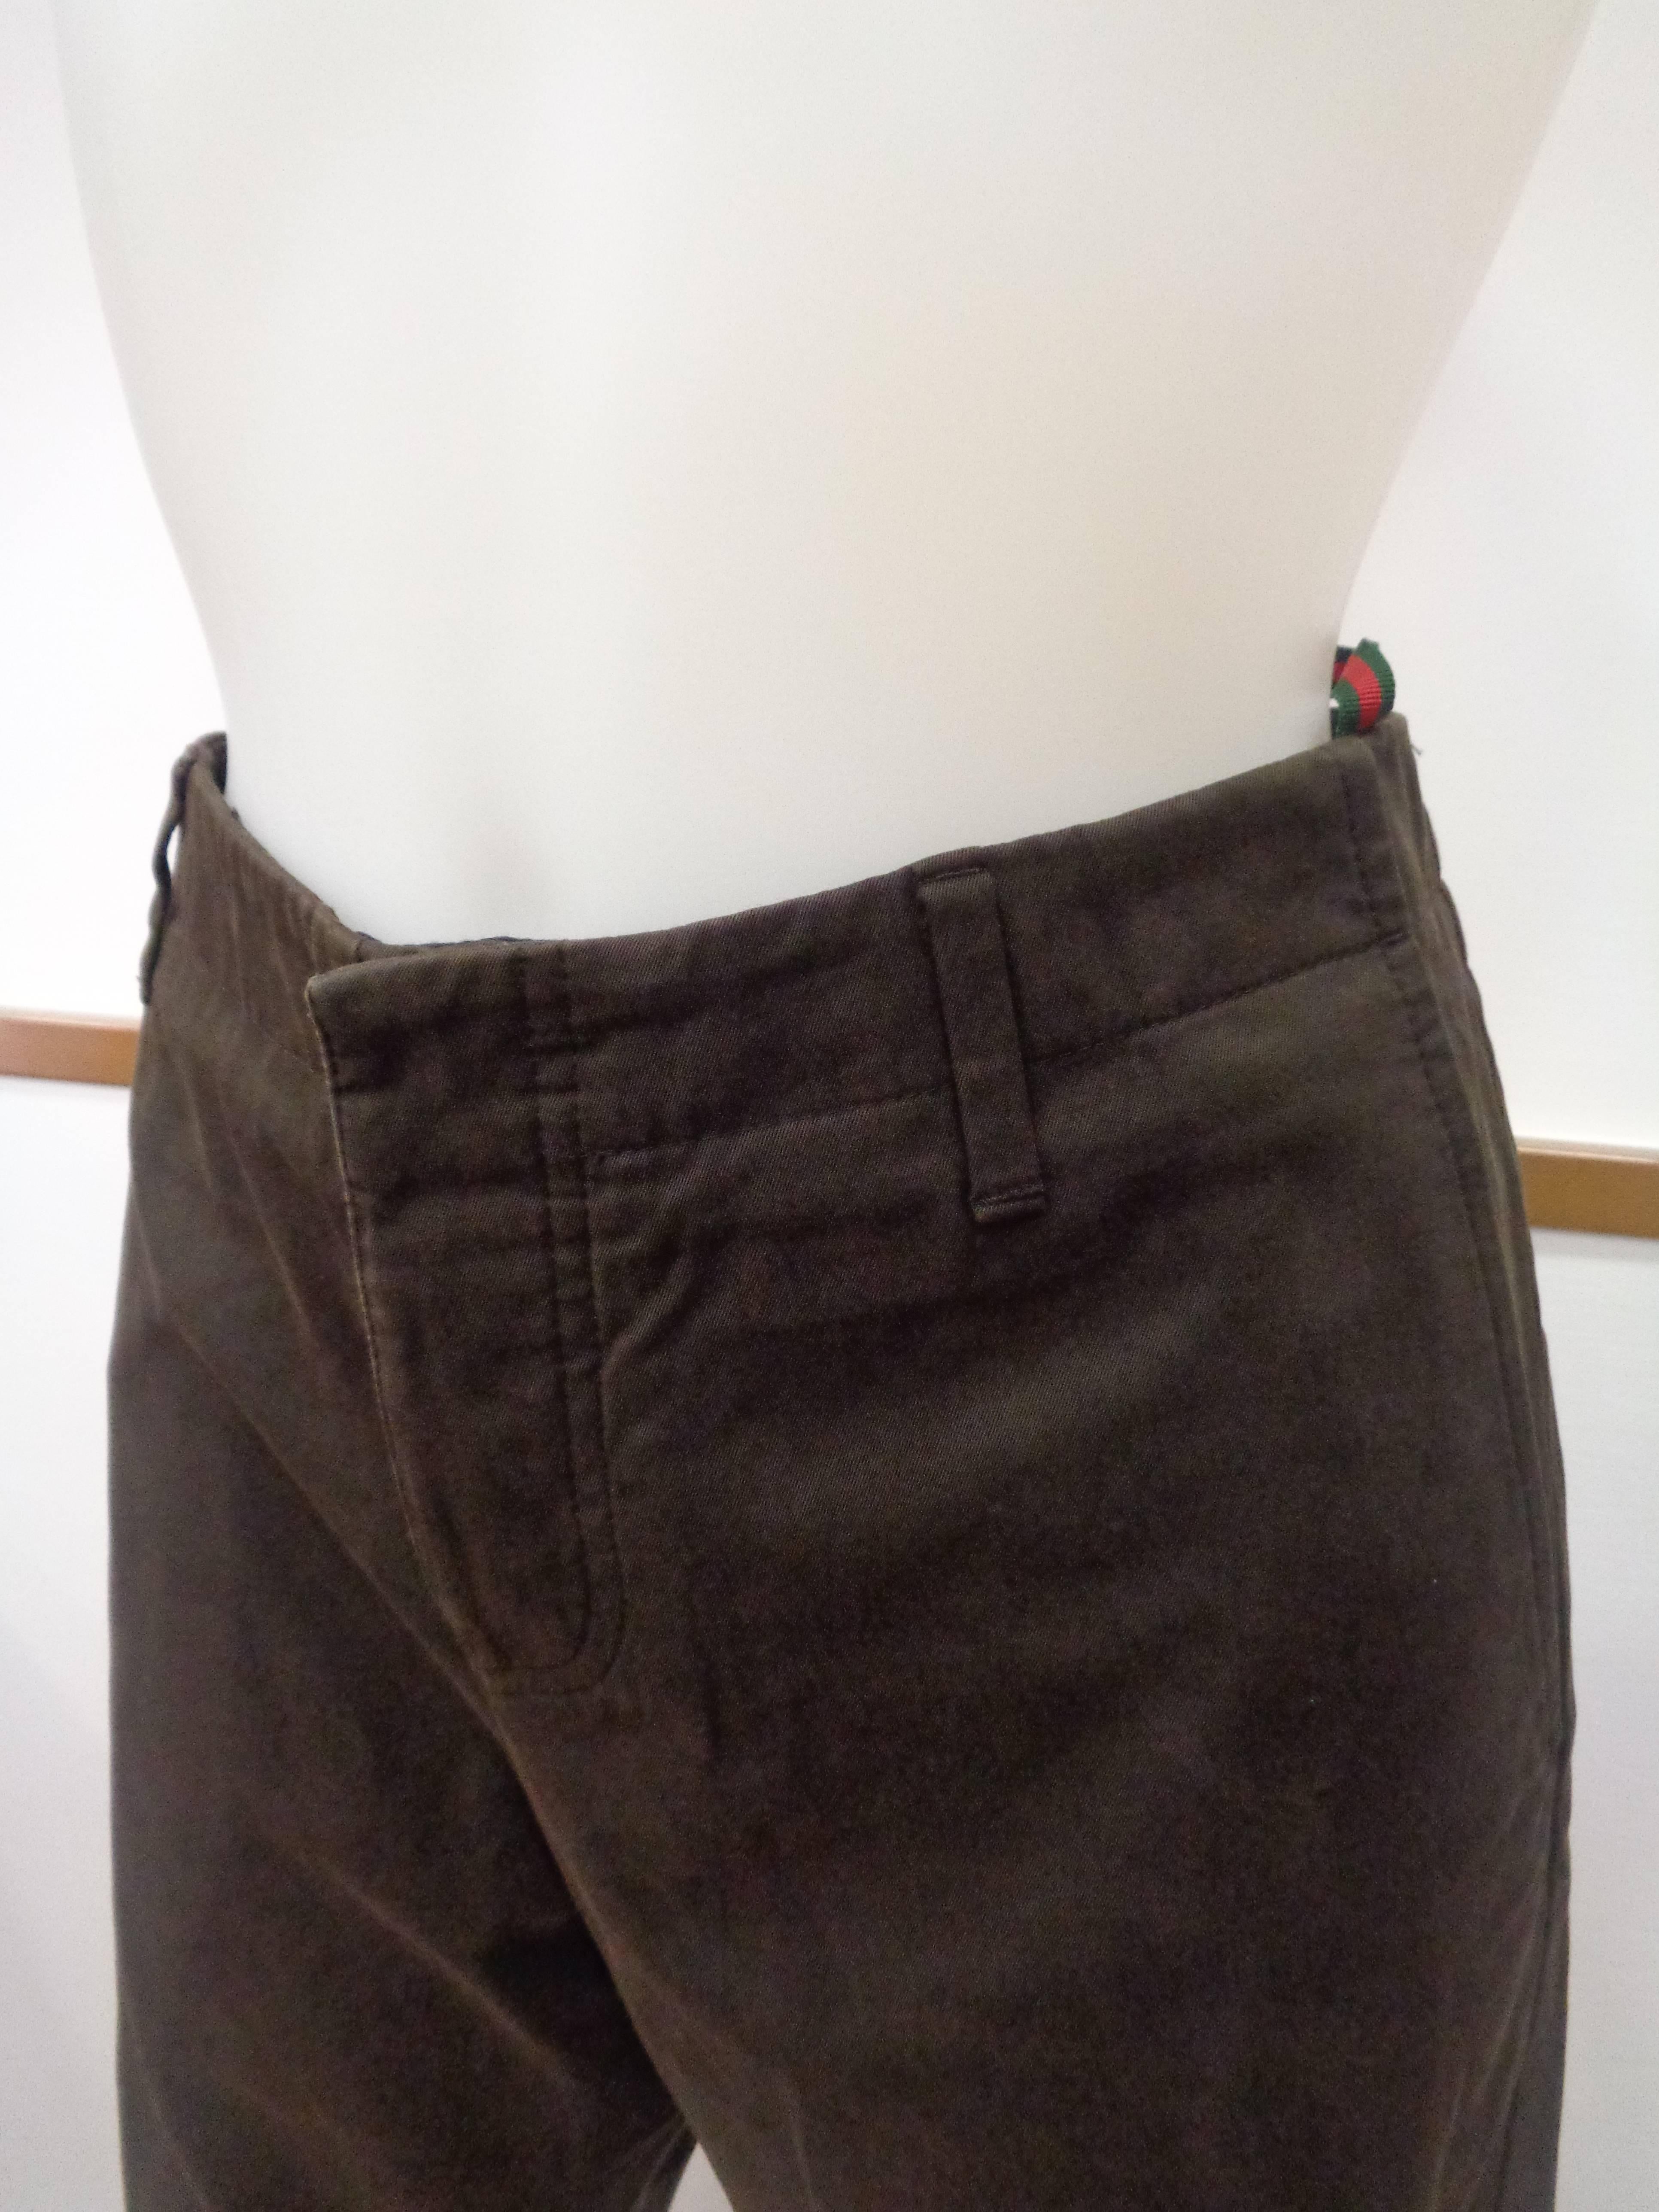 Gucci Brown Cotton Trousers

Totally made in italy in italian size range 46

Composition; Cotton